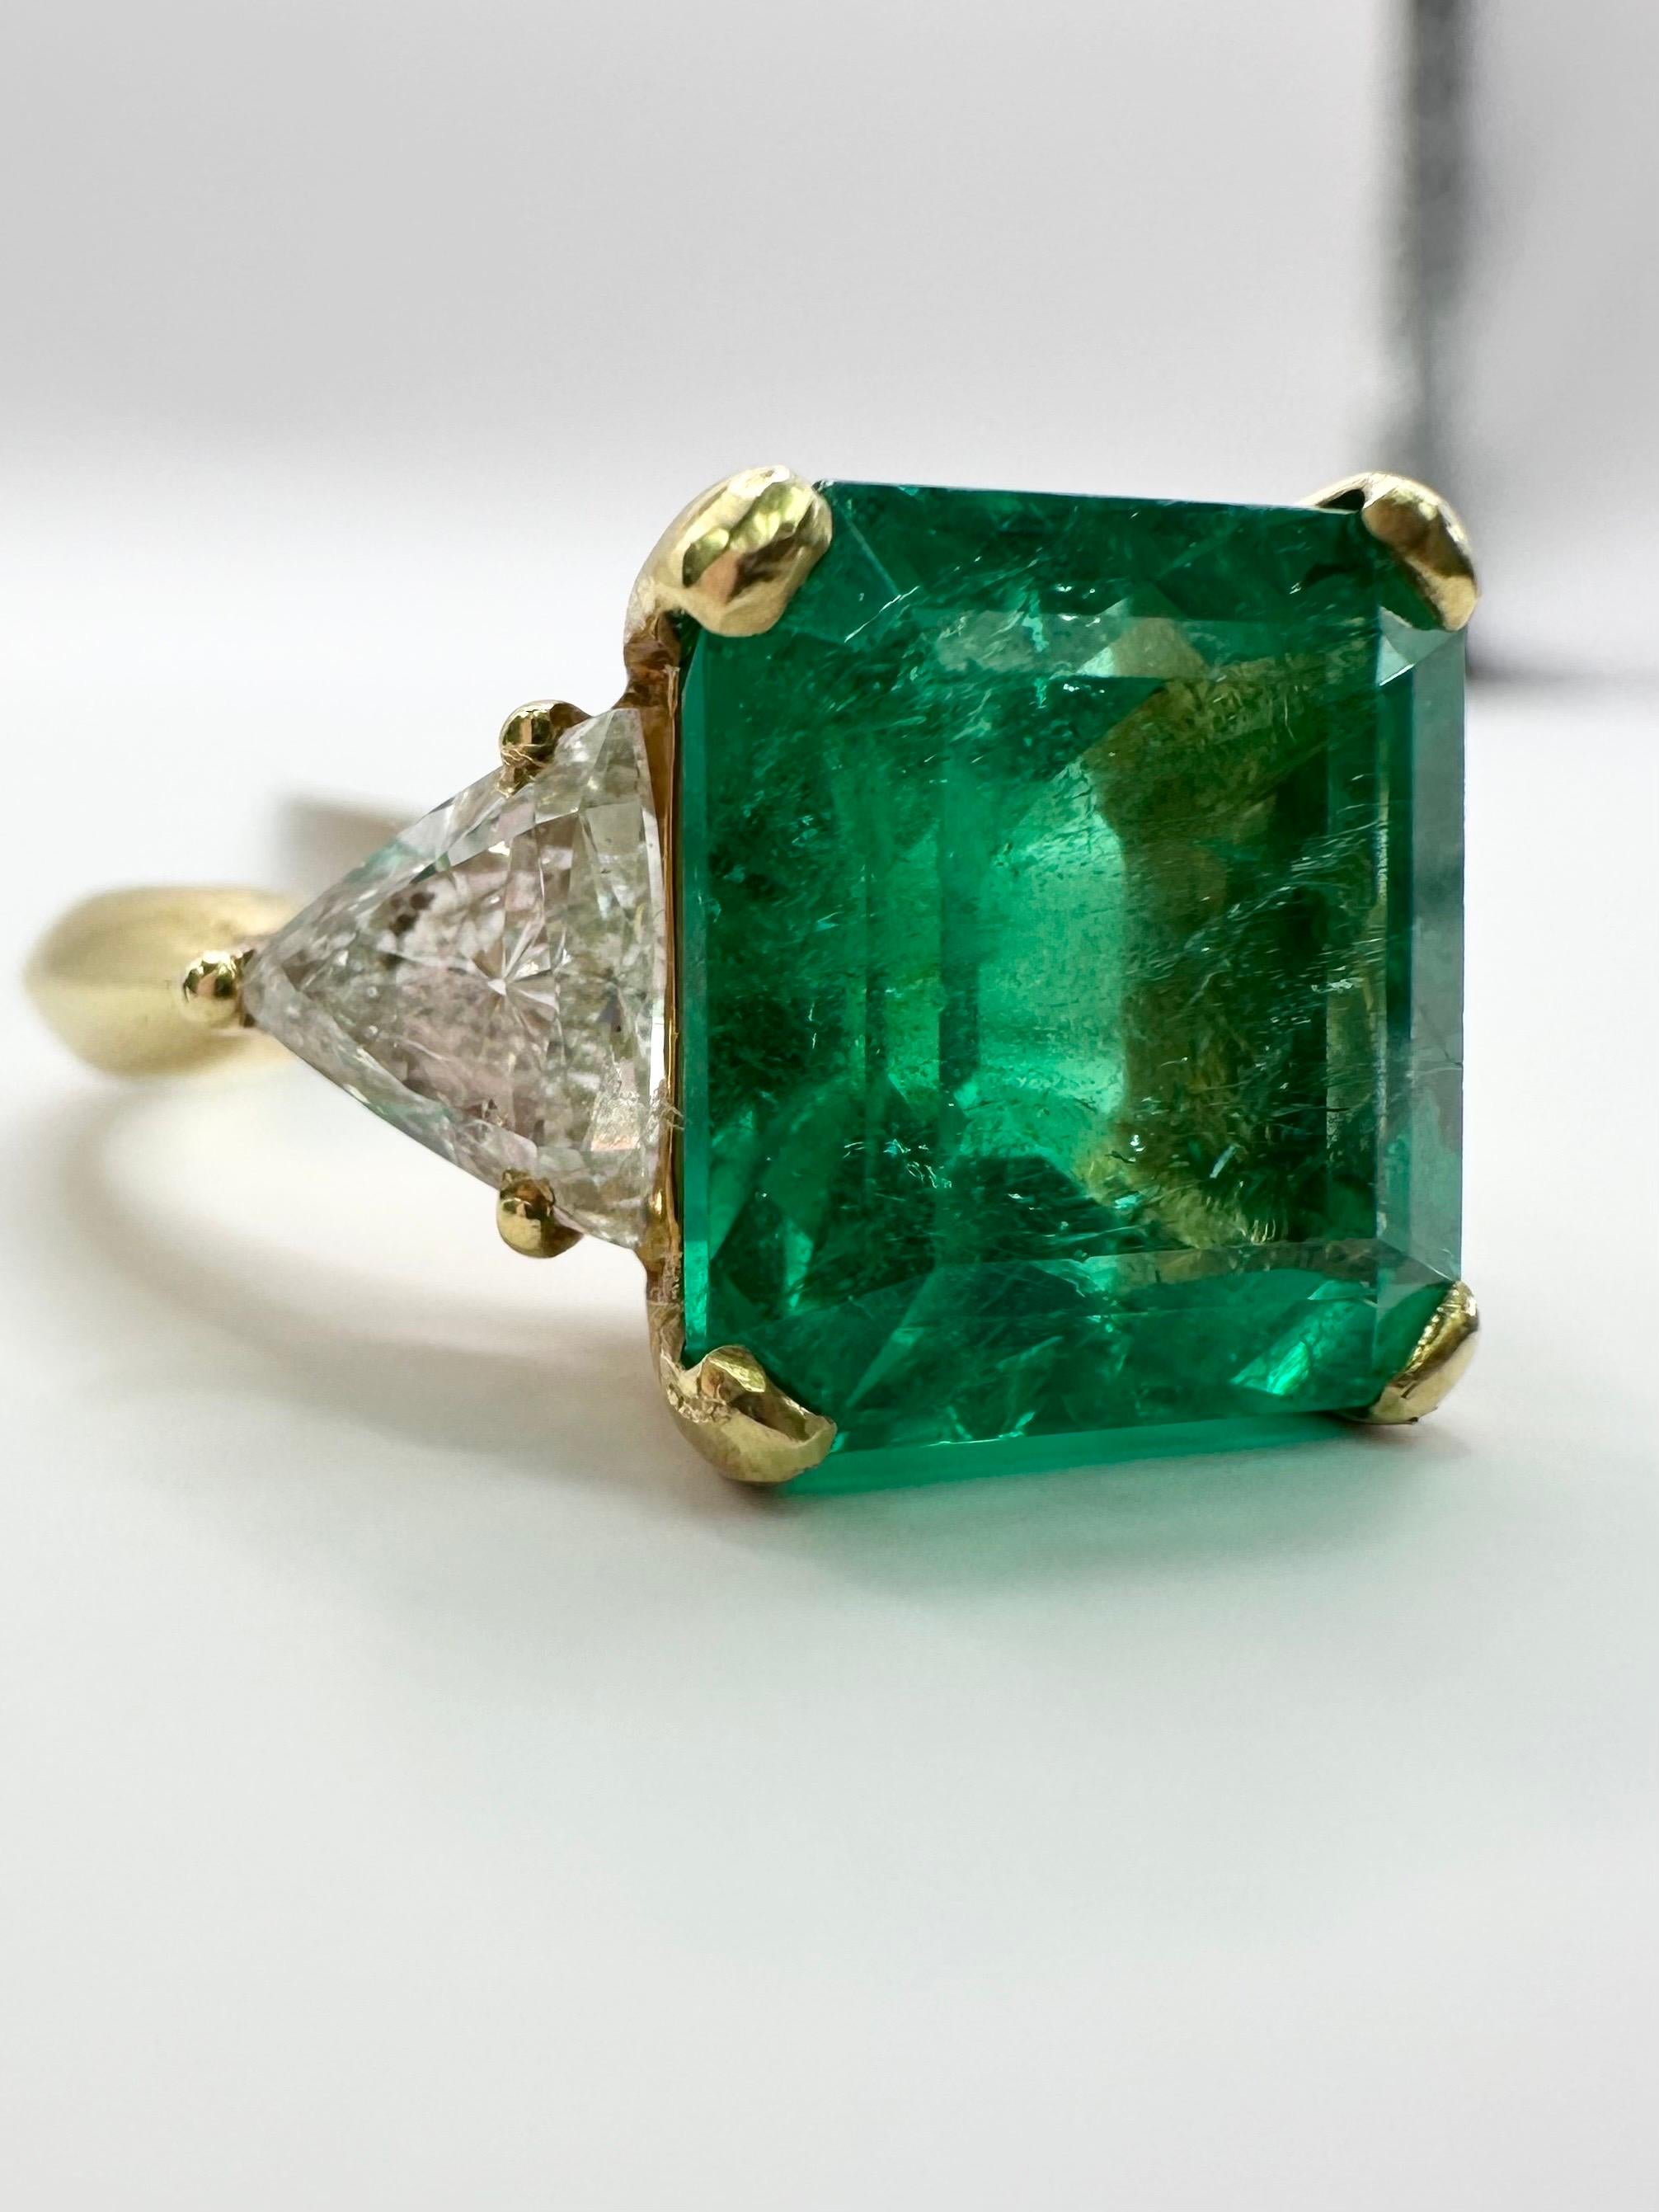 Trillion Cut Colombian emerald diamond ring 18KT yellow gold RARE natural emerald 6.98ct For Sale